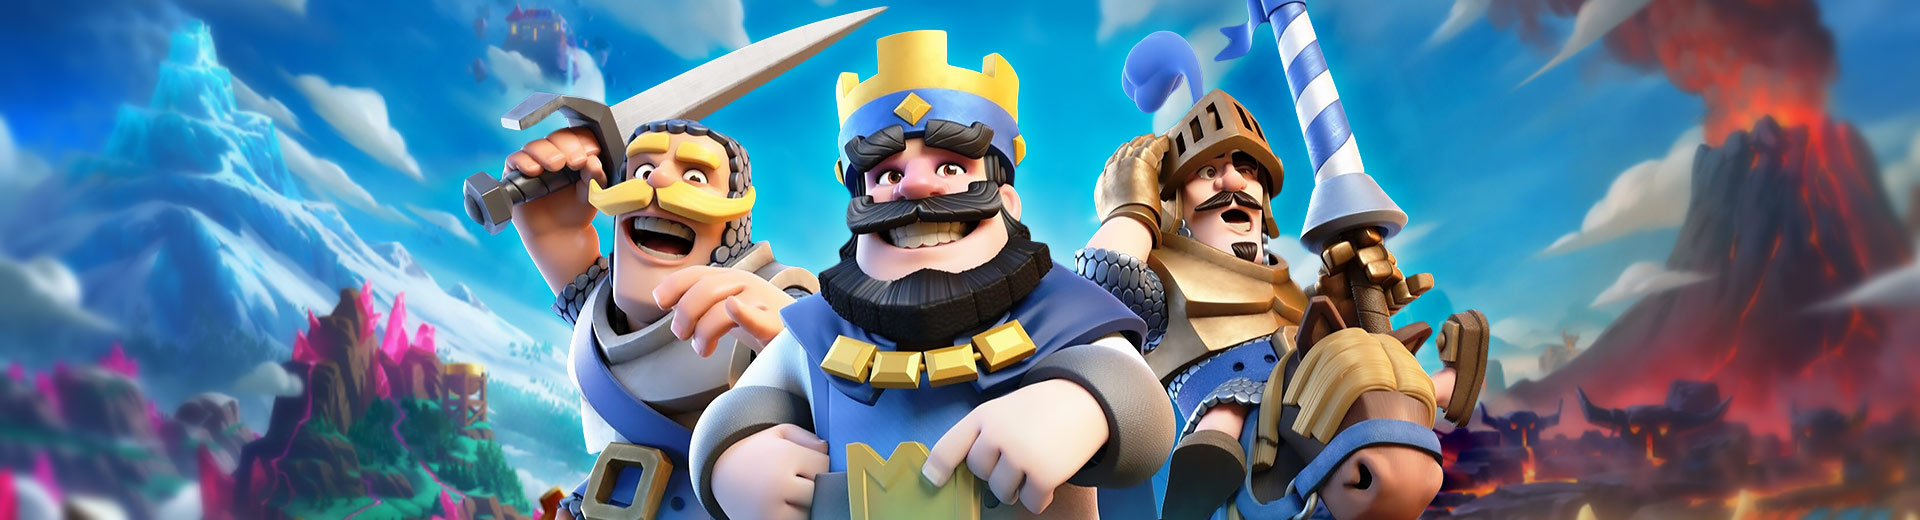 play clash royale online